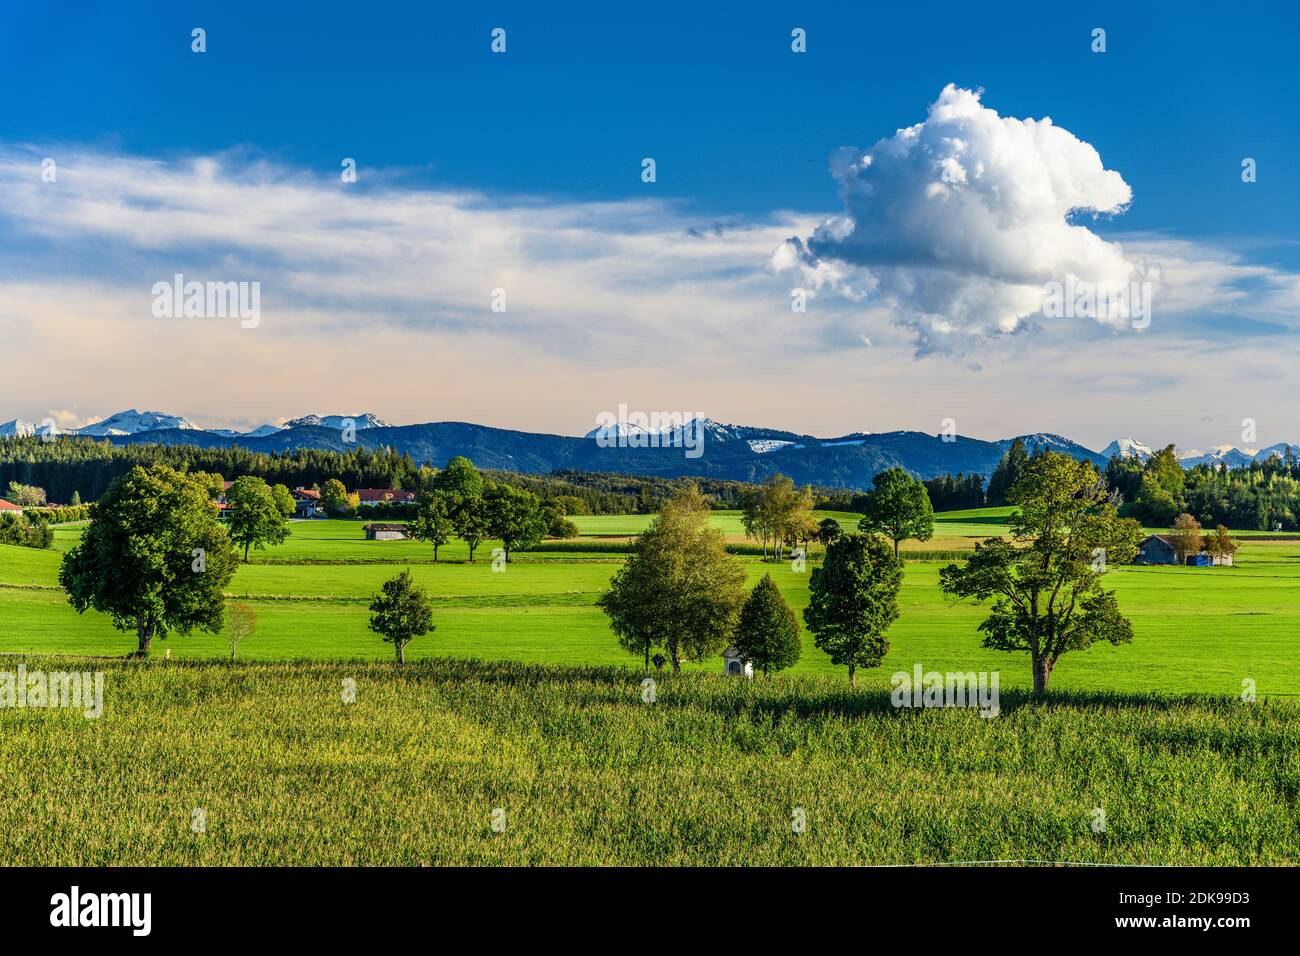 Germany, Bavaria, Upper Bavaria, Tölzer Land, Dietramszell, district Lochen, cultural landscape against the foothills of the Alps Stock Photo